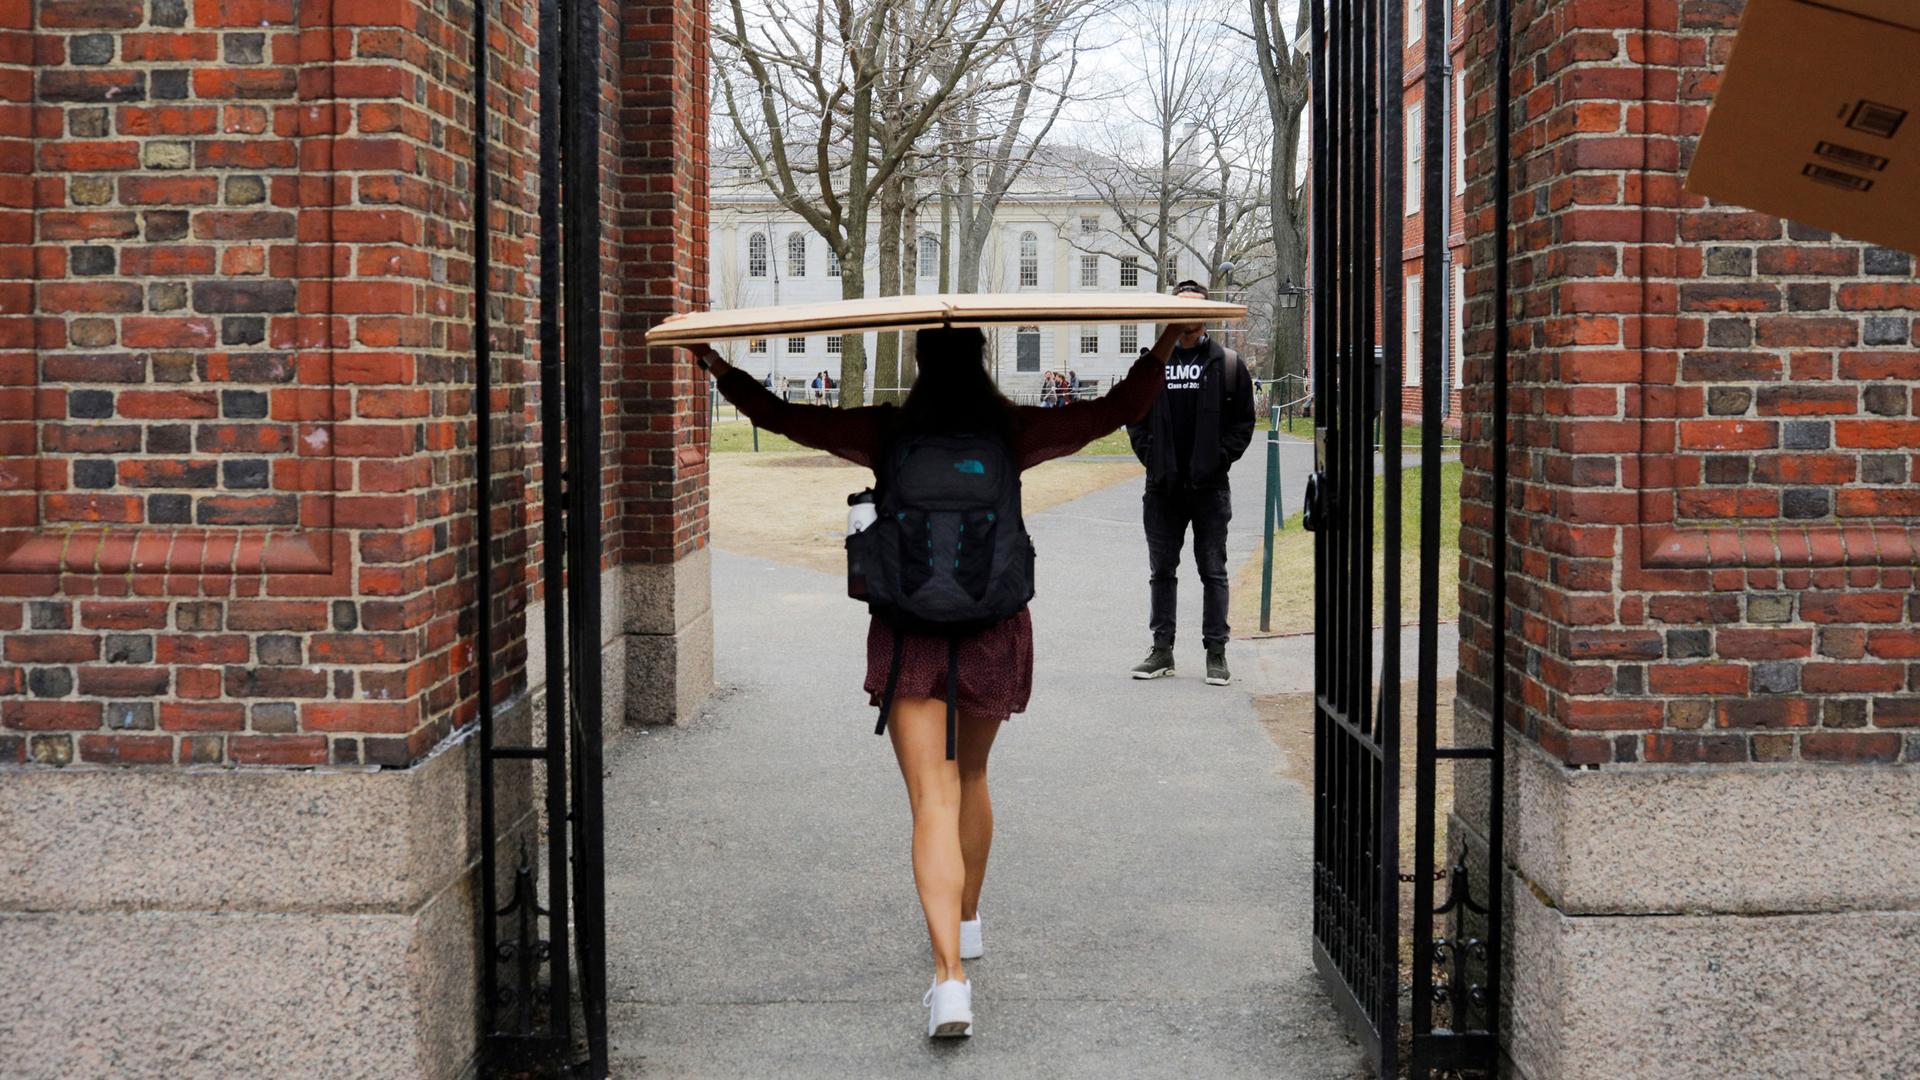 A student carries a box to her dorm at Harvard University